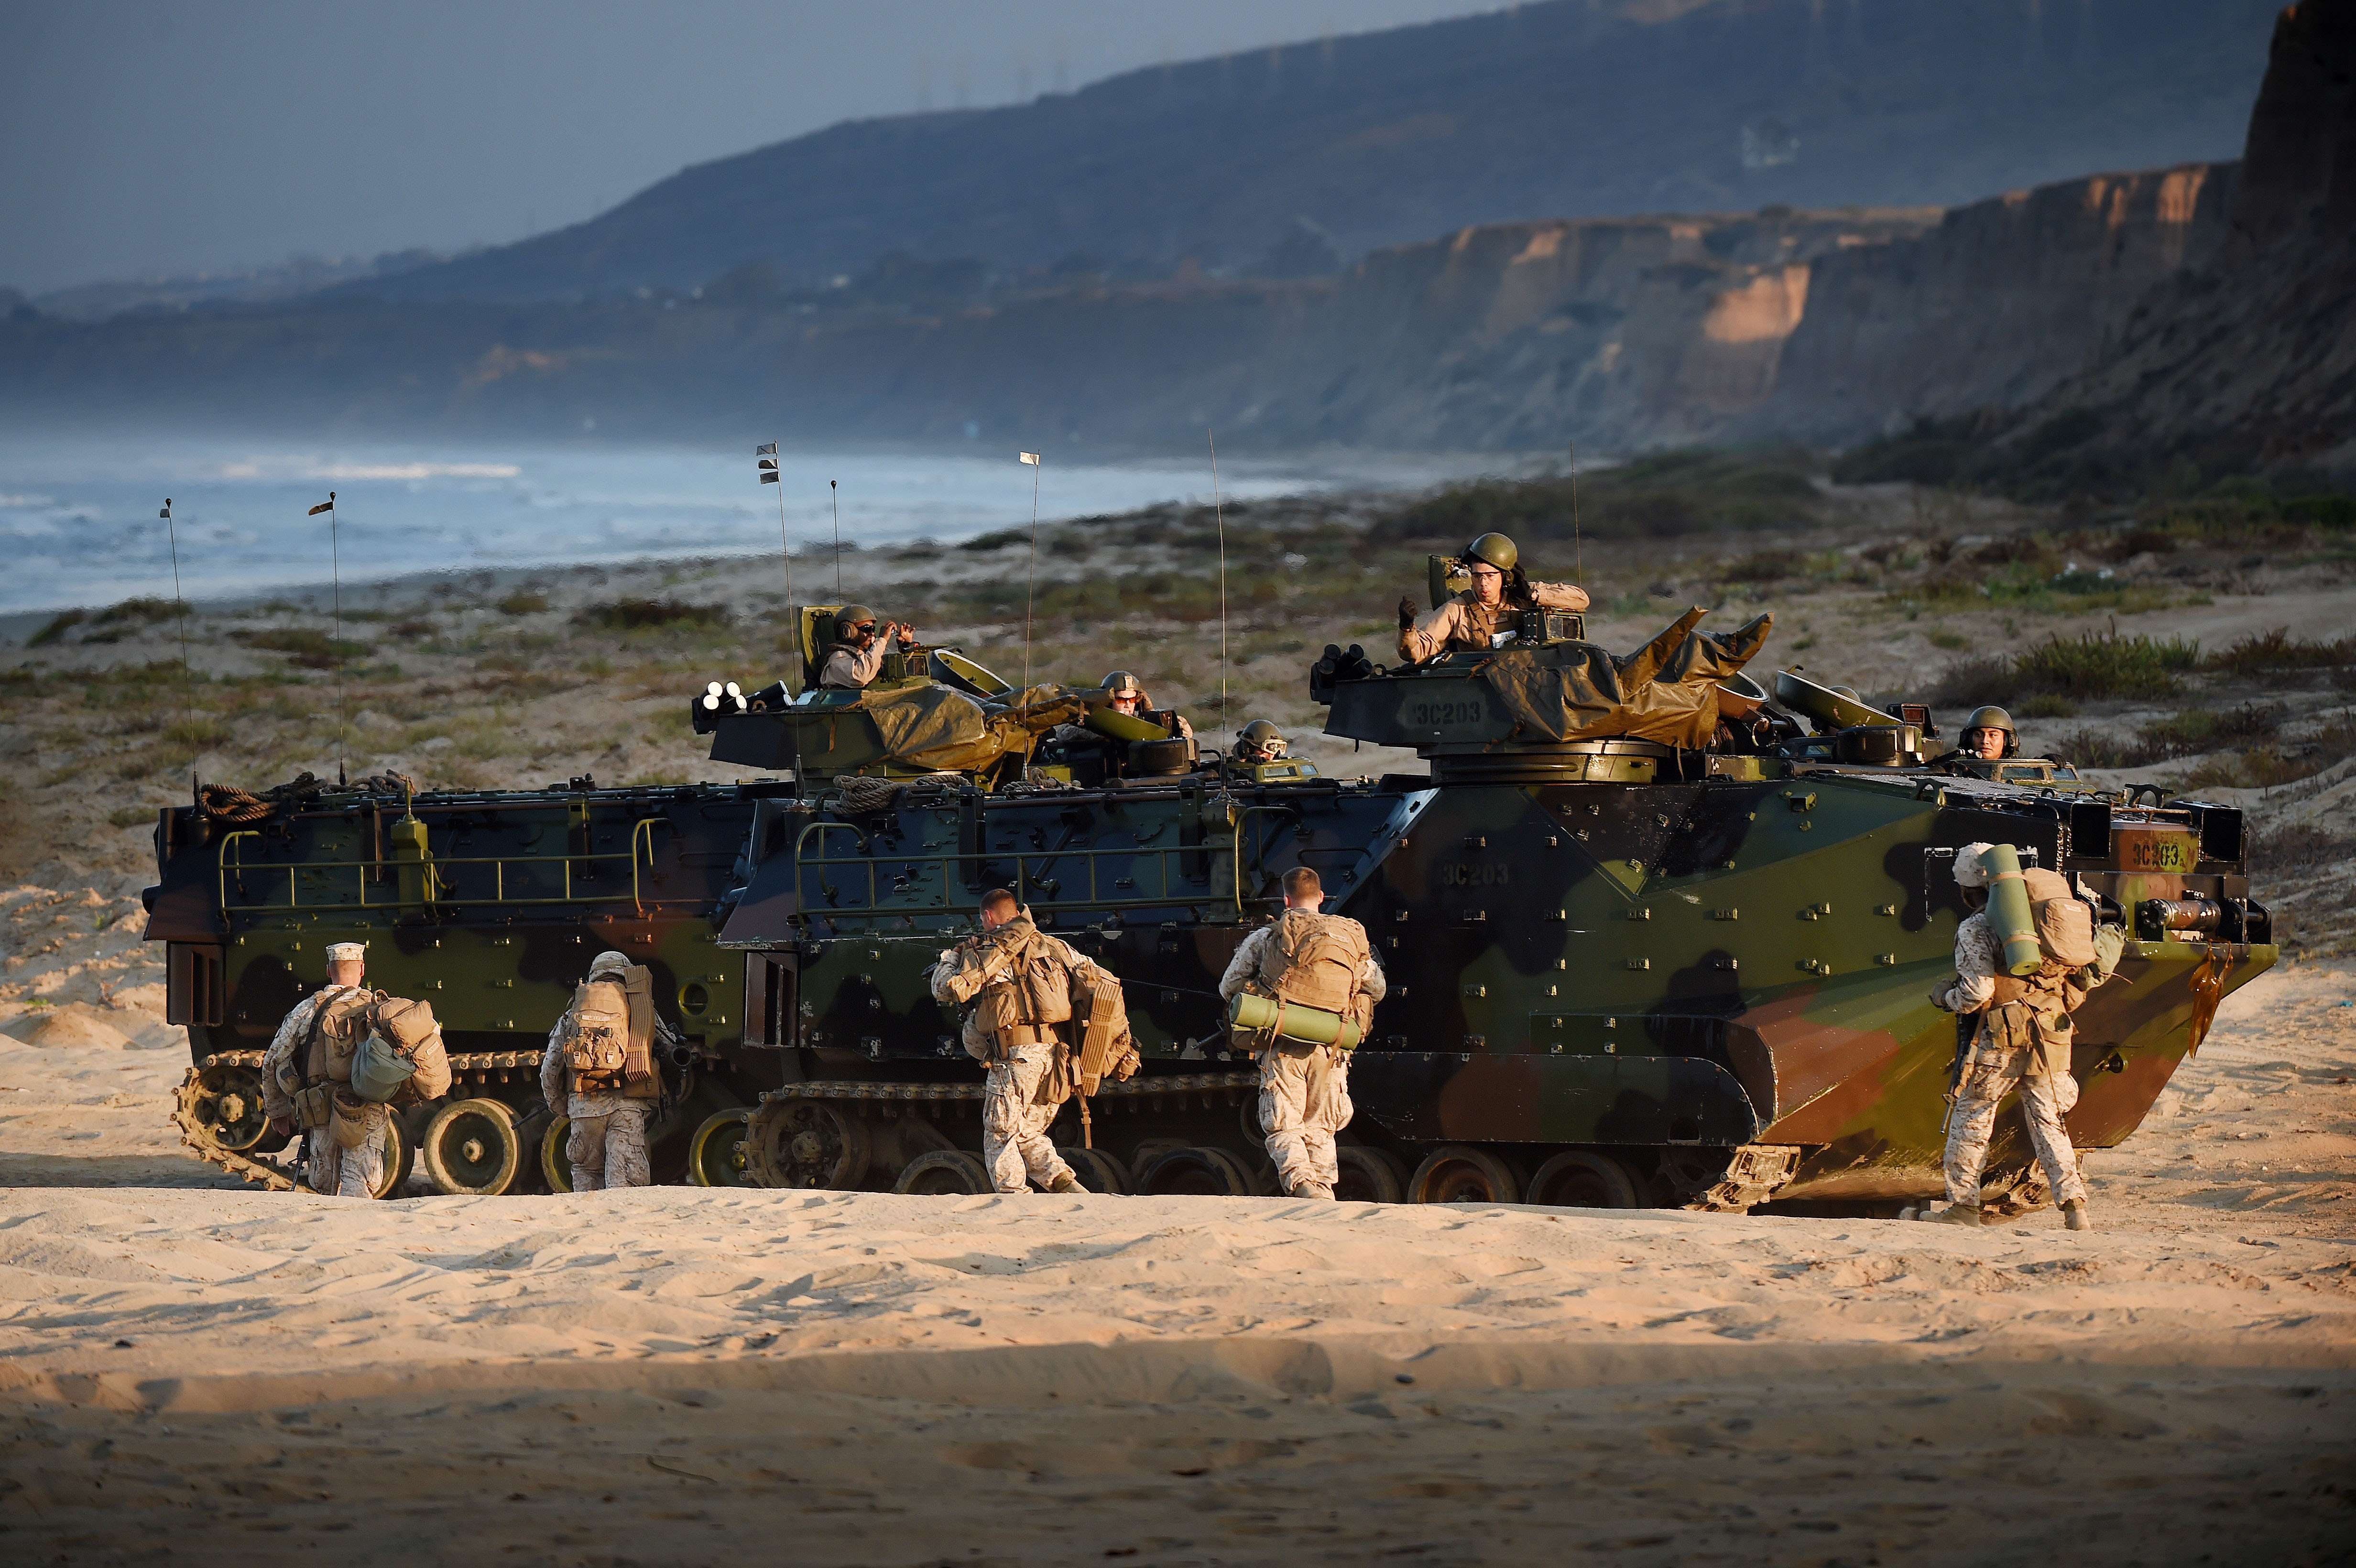 The Marine Corps's Massive Reforms to Fight China May Destroy Its